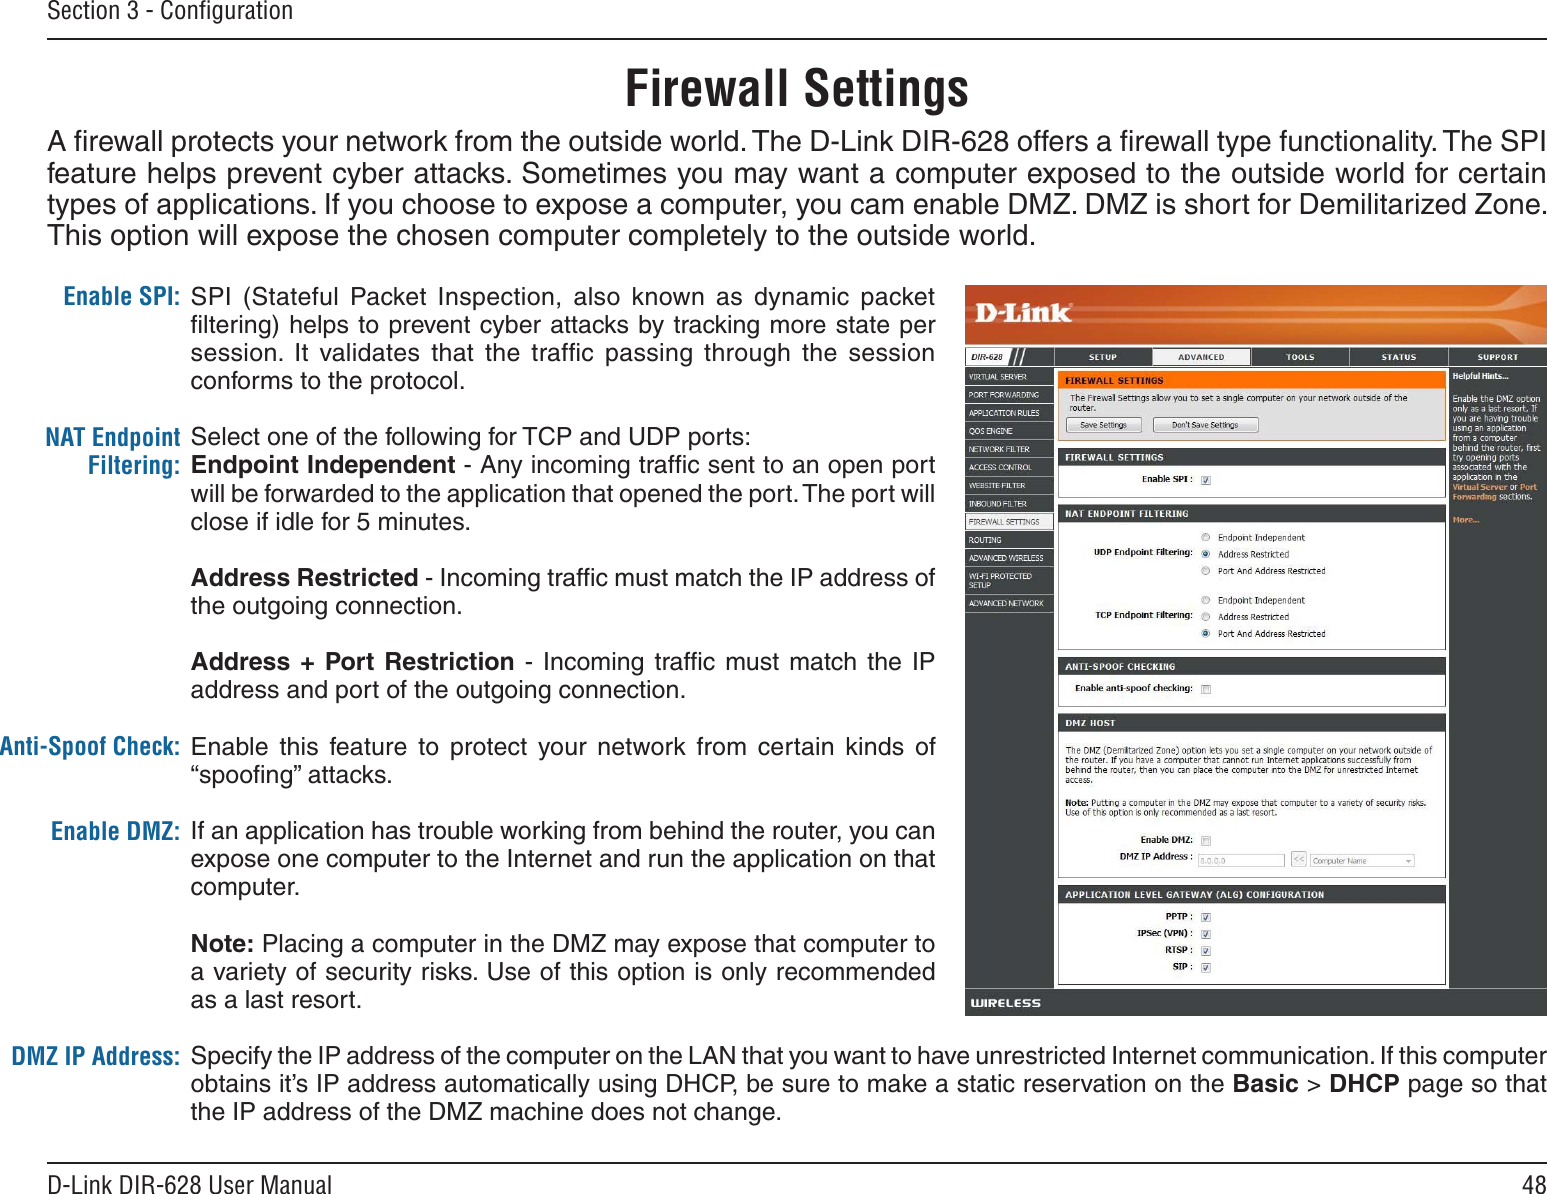 48D-Link DIR-628 User ManualSection 3 - ConﬁgurationFirewall SettingsA ﬁrewall protects your network from the outside world. The D-Link DIR-628 offers a ﬁrewall type functionality. The SPI feature helps prevent cyber attacks. Sometimes you may want a computer exposed to the outside world for certain types of applications. If you choose to expose a computer, you cam enable DMZ. DMZ is short for Demilitarized Zone. This option will expose the chosen computer completely to the outside world.SPI  (Stateful  Packet  Inspection,  also  known  as  dynamic  packet ﬁltering) helps to prevent cyber attacks by tracking more state per session.  It  validates  that  the  trafﬁc  passing  through  the  session conforms to the protocol.Select one of the following for TCP and UDP ports:Endpoint Independent - Any incoming trafﬁc sent to an open port will be forwarded to the application that opened the port. The port will close if idle for 5 minutes.Address Restricted - Incoming trafﬁc must match the IP address of the outgoing connection.Address +  Port Restriction  -  Incoming  trafﬁc  must  match  the  IP address and port of the outgoing connection.Enable this  feature  to  protect  your  network  from  certain  kinds  of “spooﬁng” attacks. If an application has trouble working from behind the router, you can expose one computer to the Internet and run the application on that computer.Note: Placing a computer in the DMZ may expose that computer to a variety of security risks. Use of this option is only recommended as a last resort.Specify the IP address of the computer on the LAN that you want to have unrestricted Internet communication. If this computer obtains it’s IP address automatically using DHCP, be sure to make a static reservation on the Basic &gt; DHCP page so that the IP address of the DMZ machine does not change.Enable SPI:NAT Endpoint Filtering:Anti-Spoof Check:Enable DMZ:DMZ IP Address: